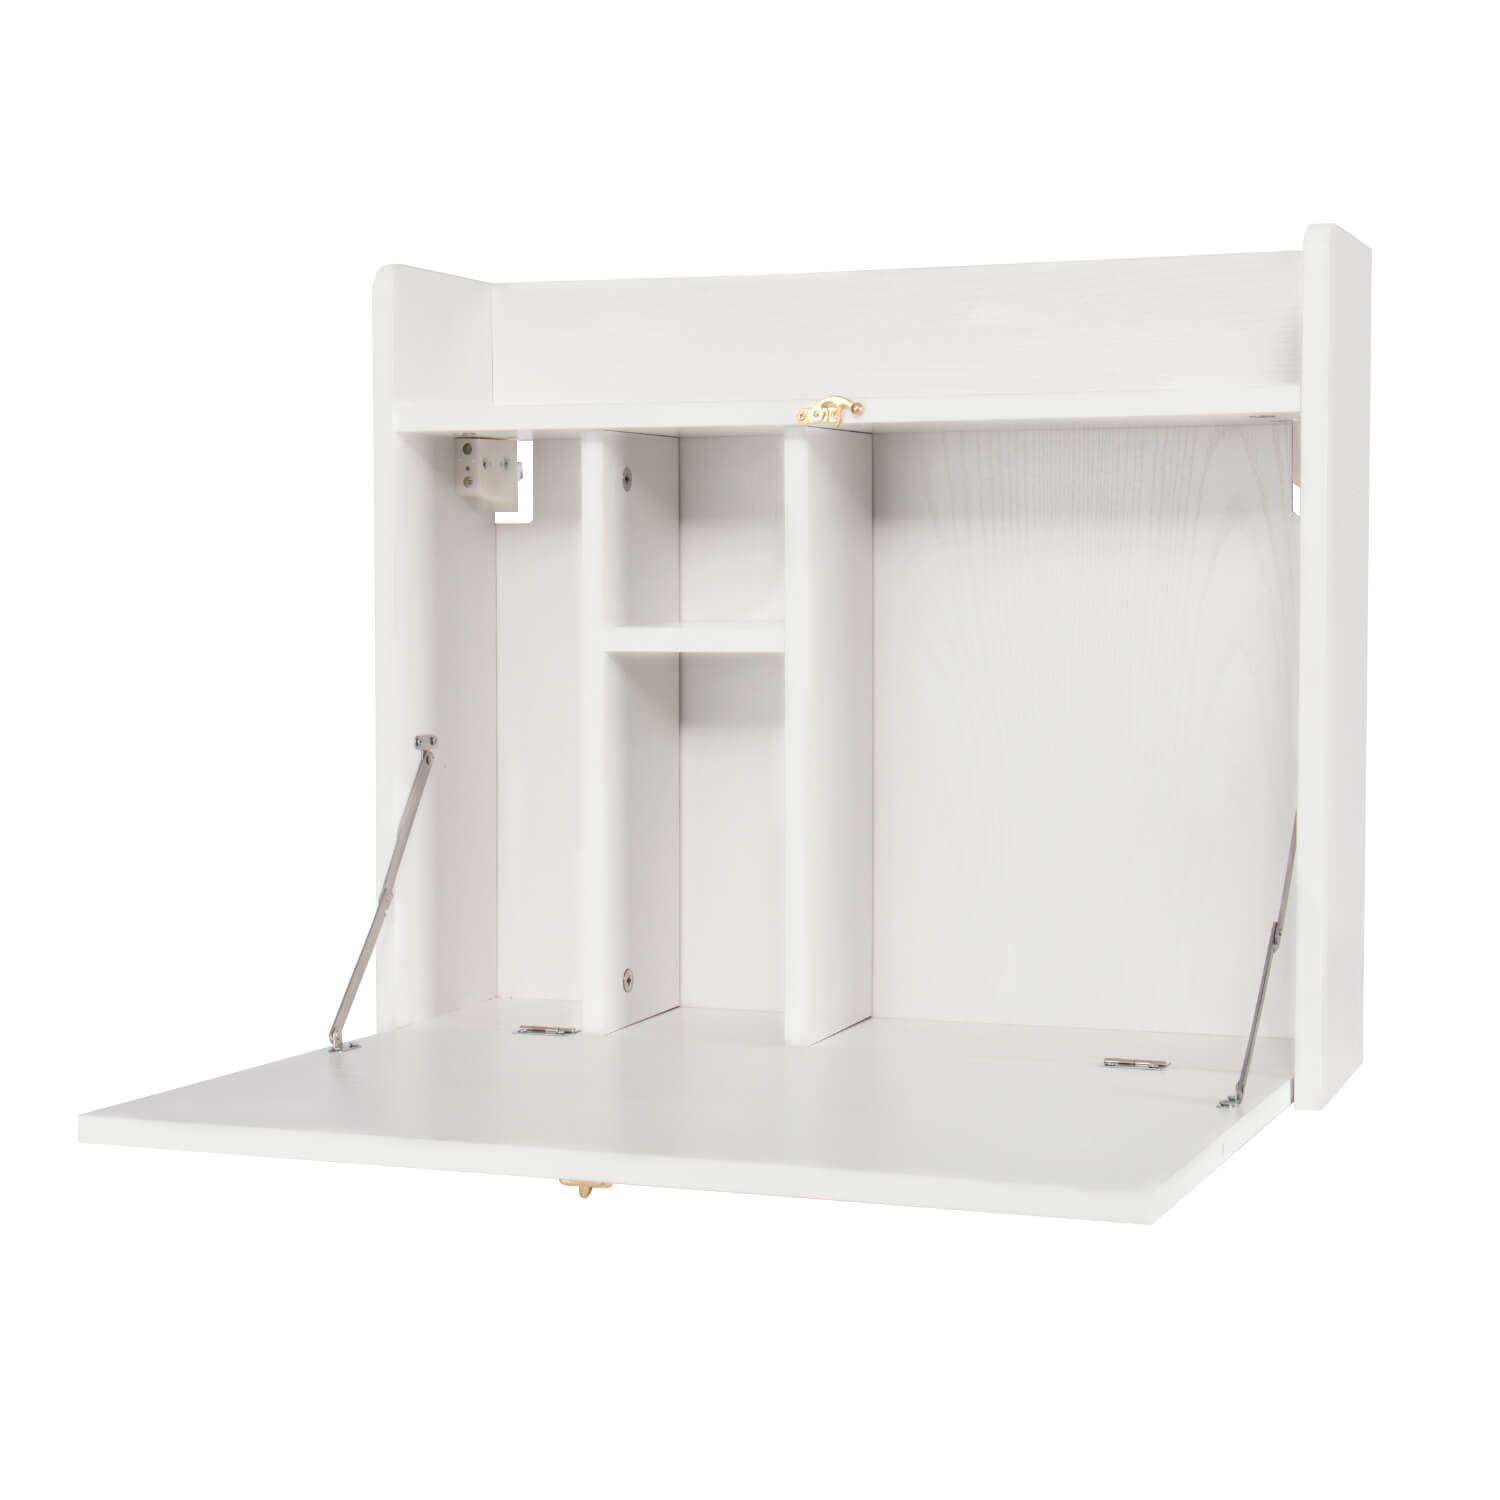 Elecwish White Wall Mounted Table Desk HW1138